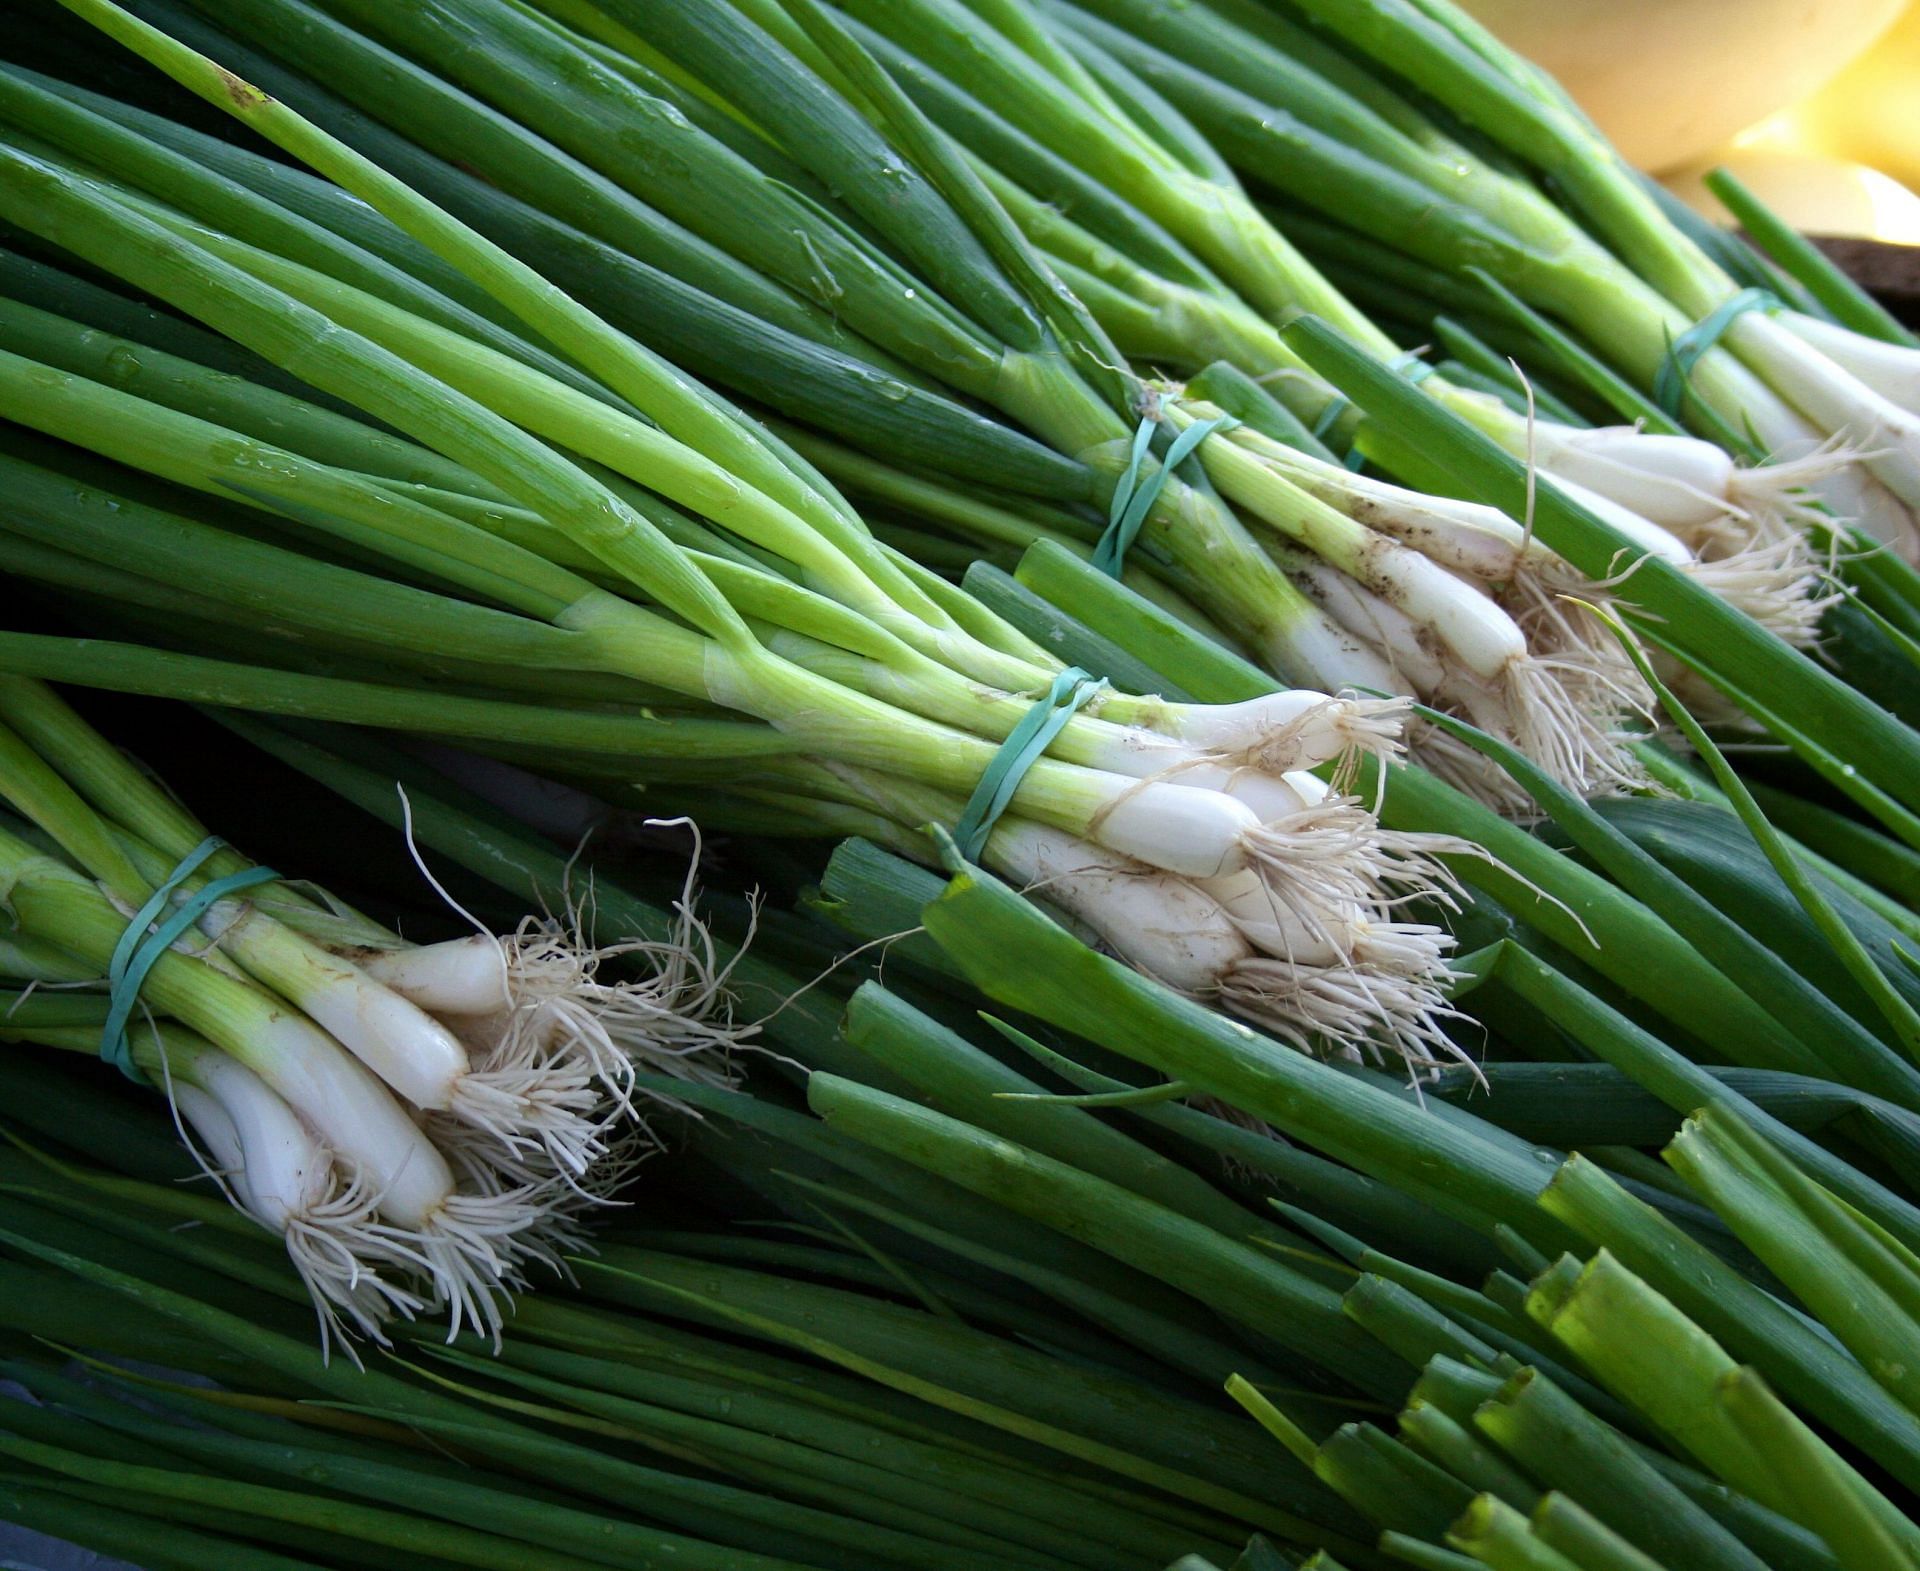 The debate of whether to use scallions vs green onions in a dish is a never-ending one (Image via Pexels @Christopher Previte)